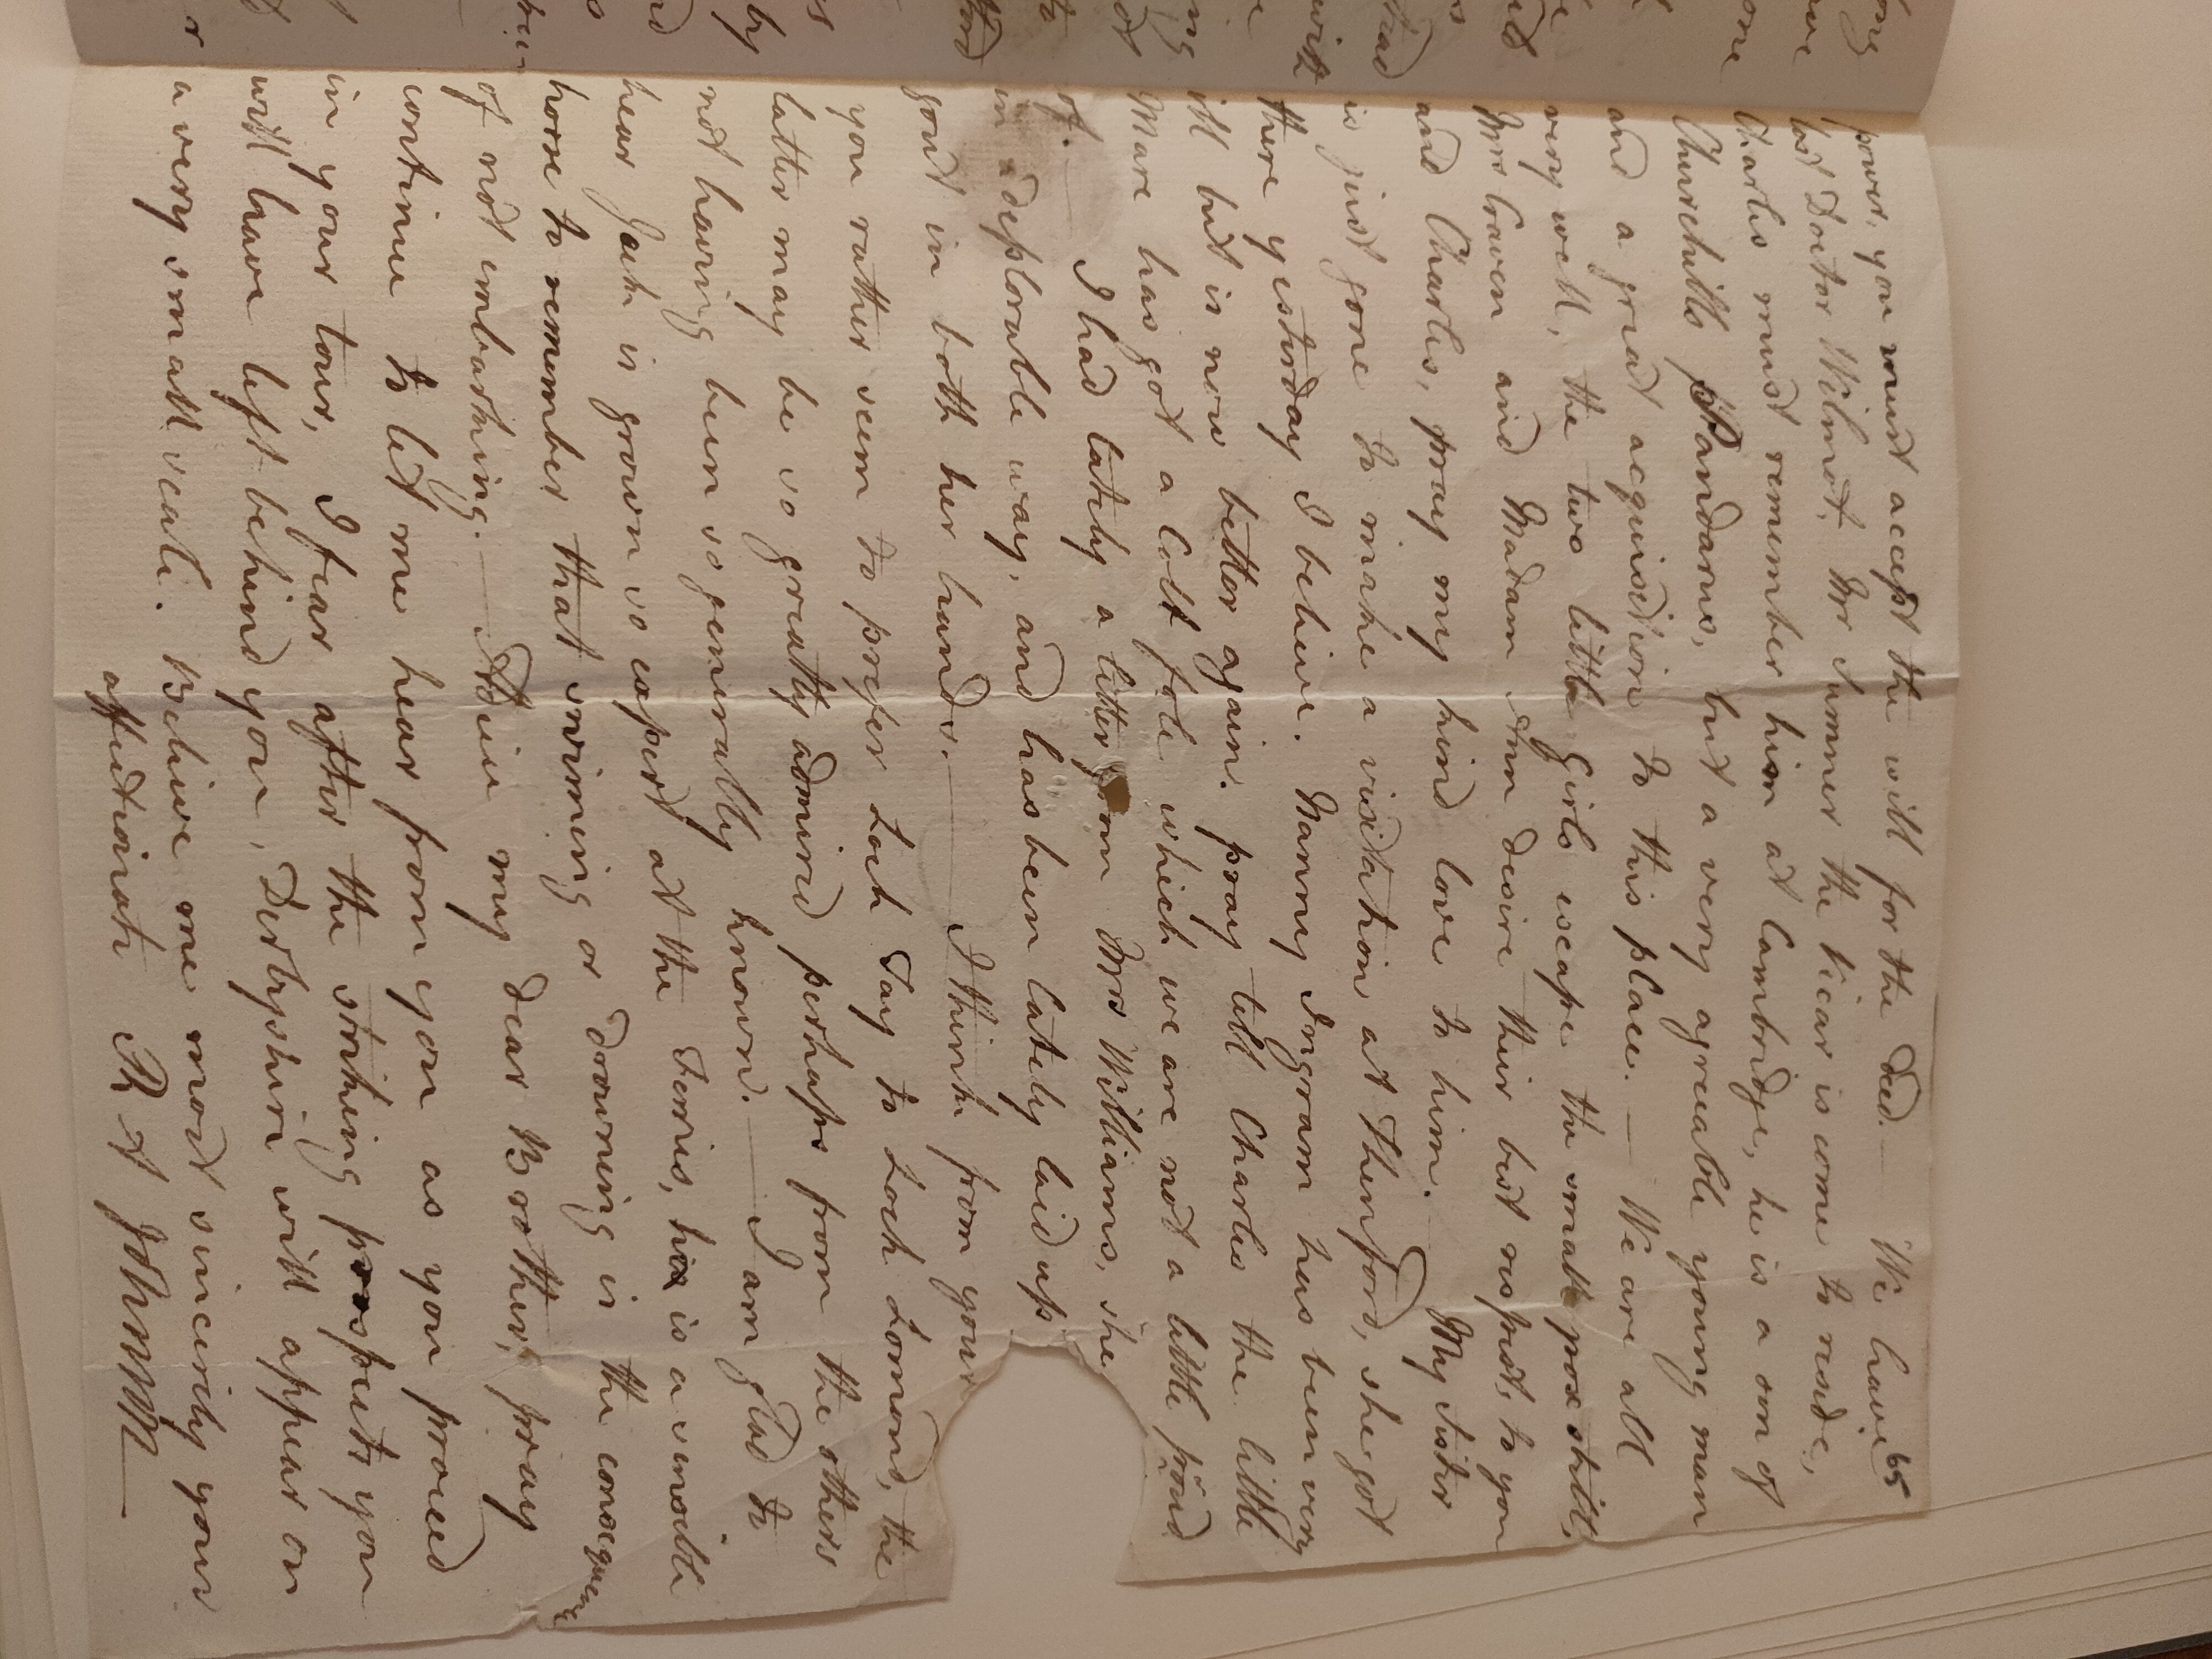 Image #3 of letter: Robert Augustus Johnson to George William Johnson, 24 July 1777